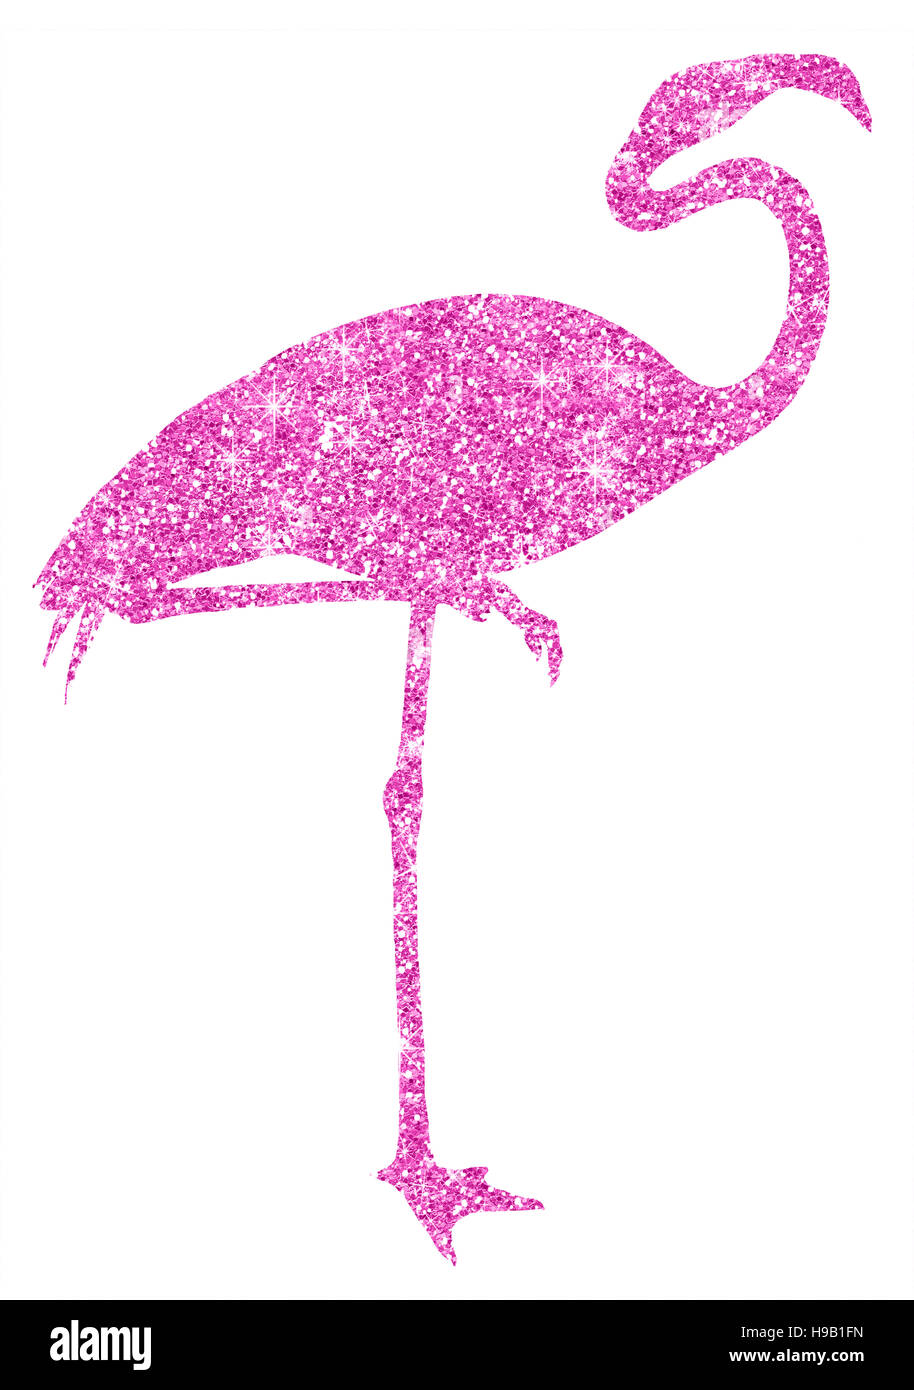 Flamingo Pink Sparkly Silhouette Banque D'Images